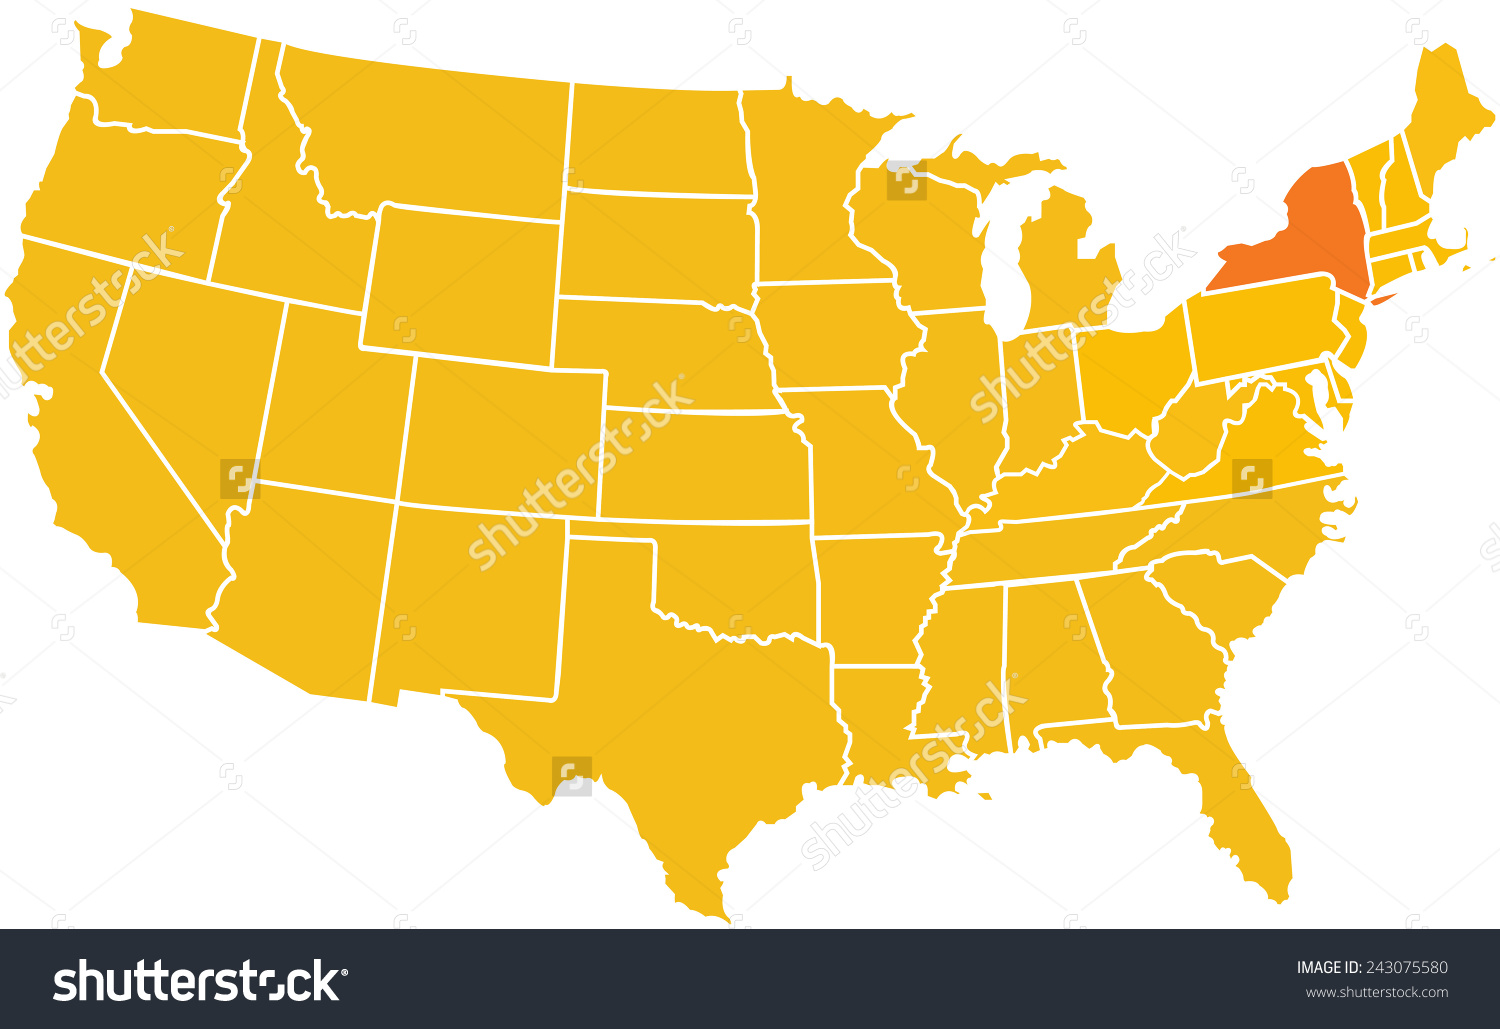 Stock Photo Map Of The Continental United States With The State Of